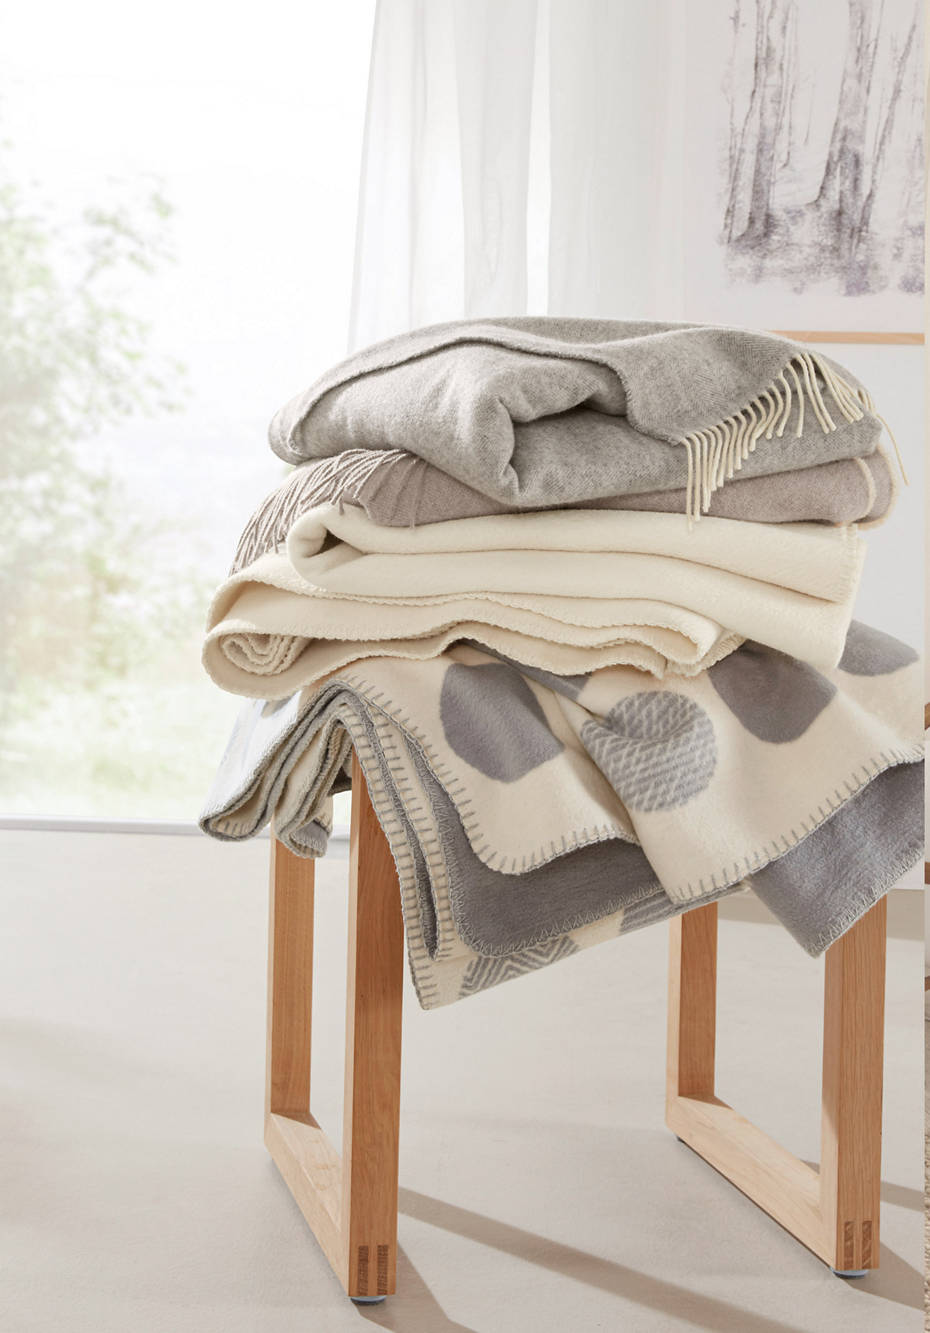 Punto blanket made of pure organic cotton